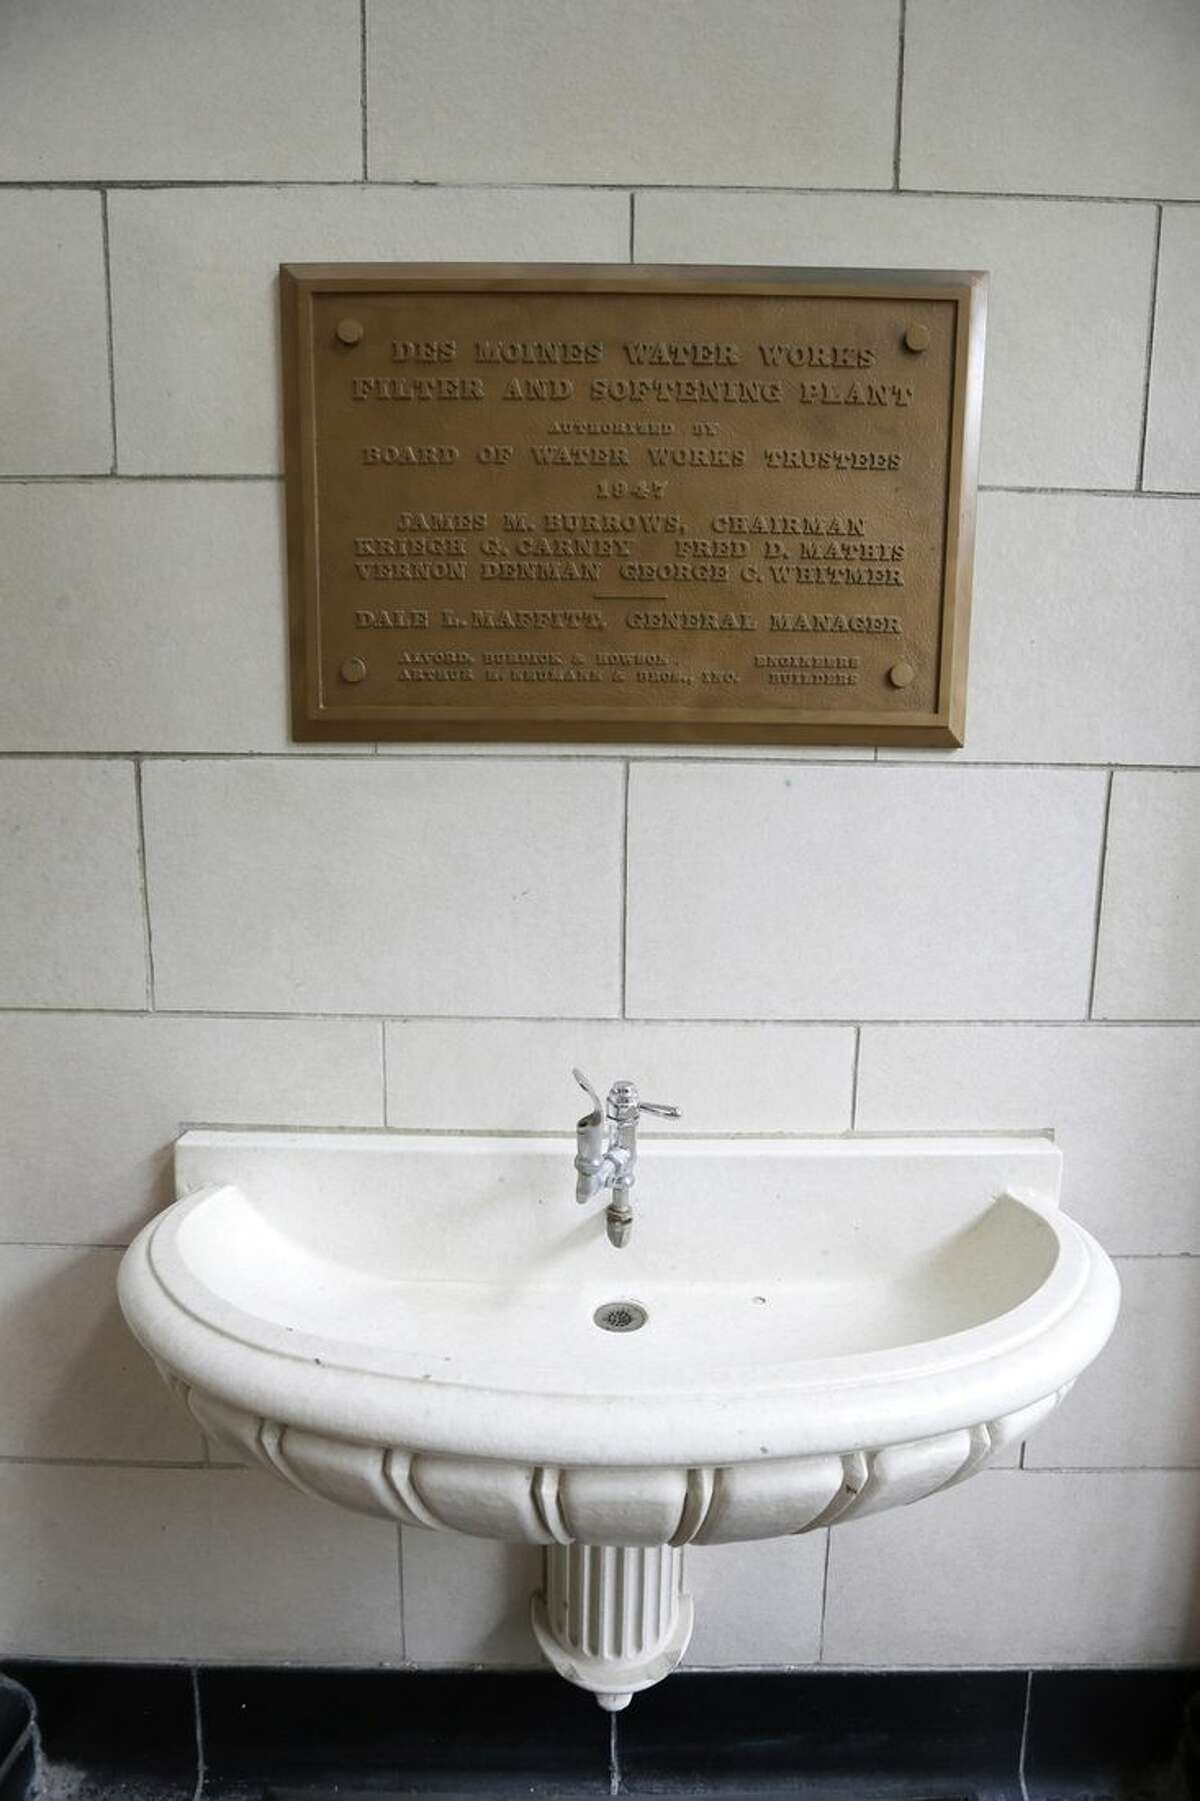 This Wednesday, July 15, 2015 photo shows an old drinking fountain at the Des Moines Water Works plant in Des Moines, Iowa. "We're reaching the end of the life cycle of some of the most critical assets we've got," says Bill Stowe, CEO and general manager of the utility, where the downtown treatment plant was built in the 1940s. (AP Photo/Charlie Neibergall)